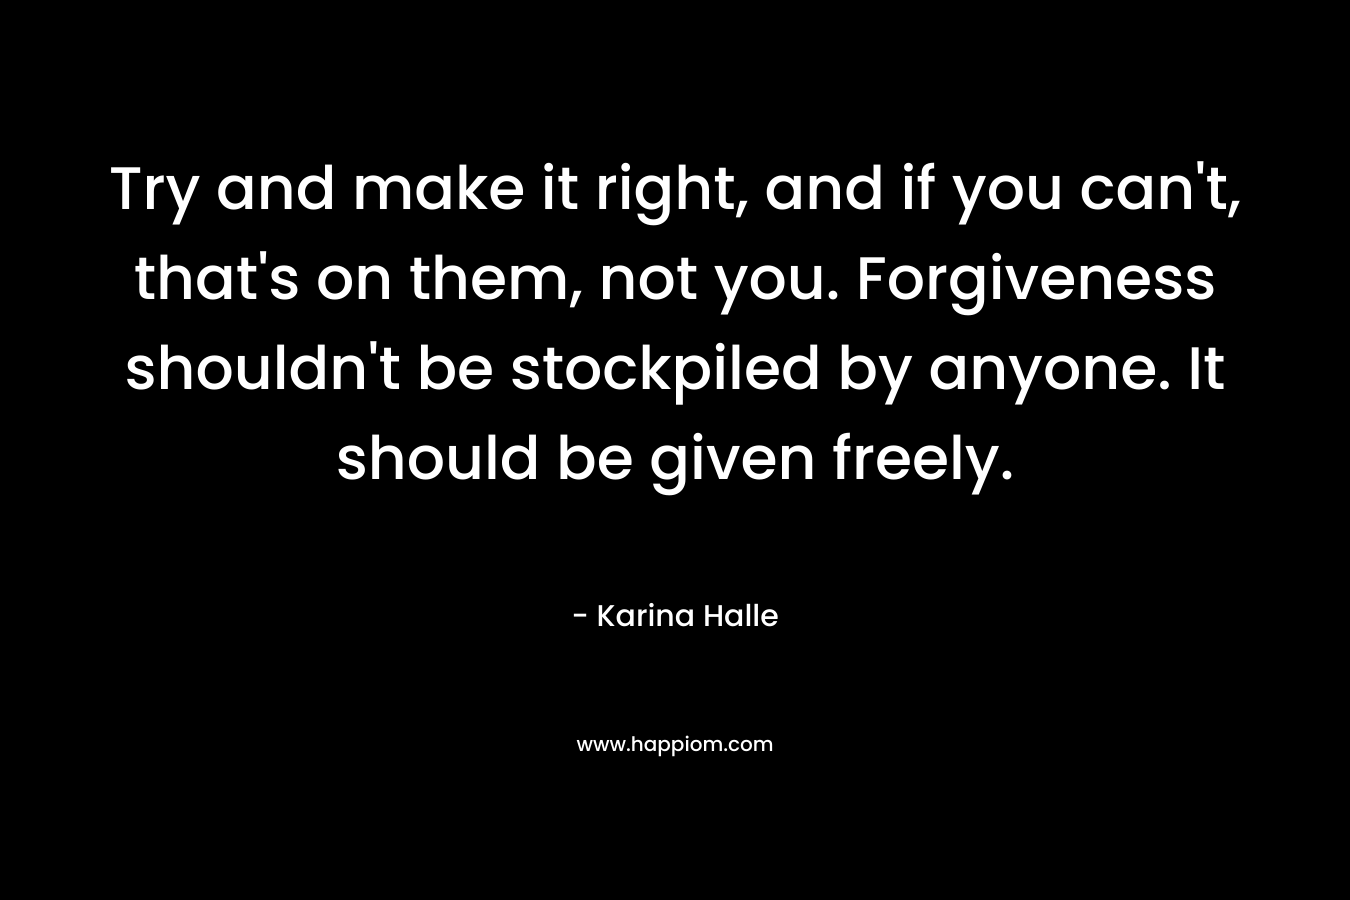 Try and make it right, and if you can't, that's on them, not you. Forgiveness shouldn't be stockpiled by anyone. It should be given freely.